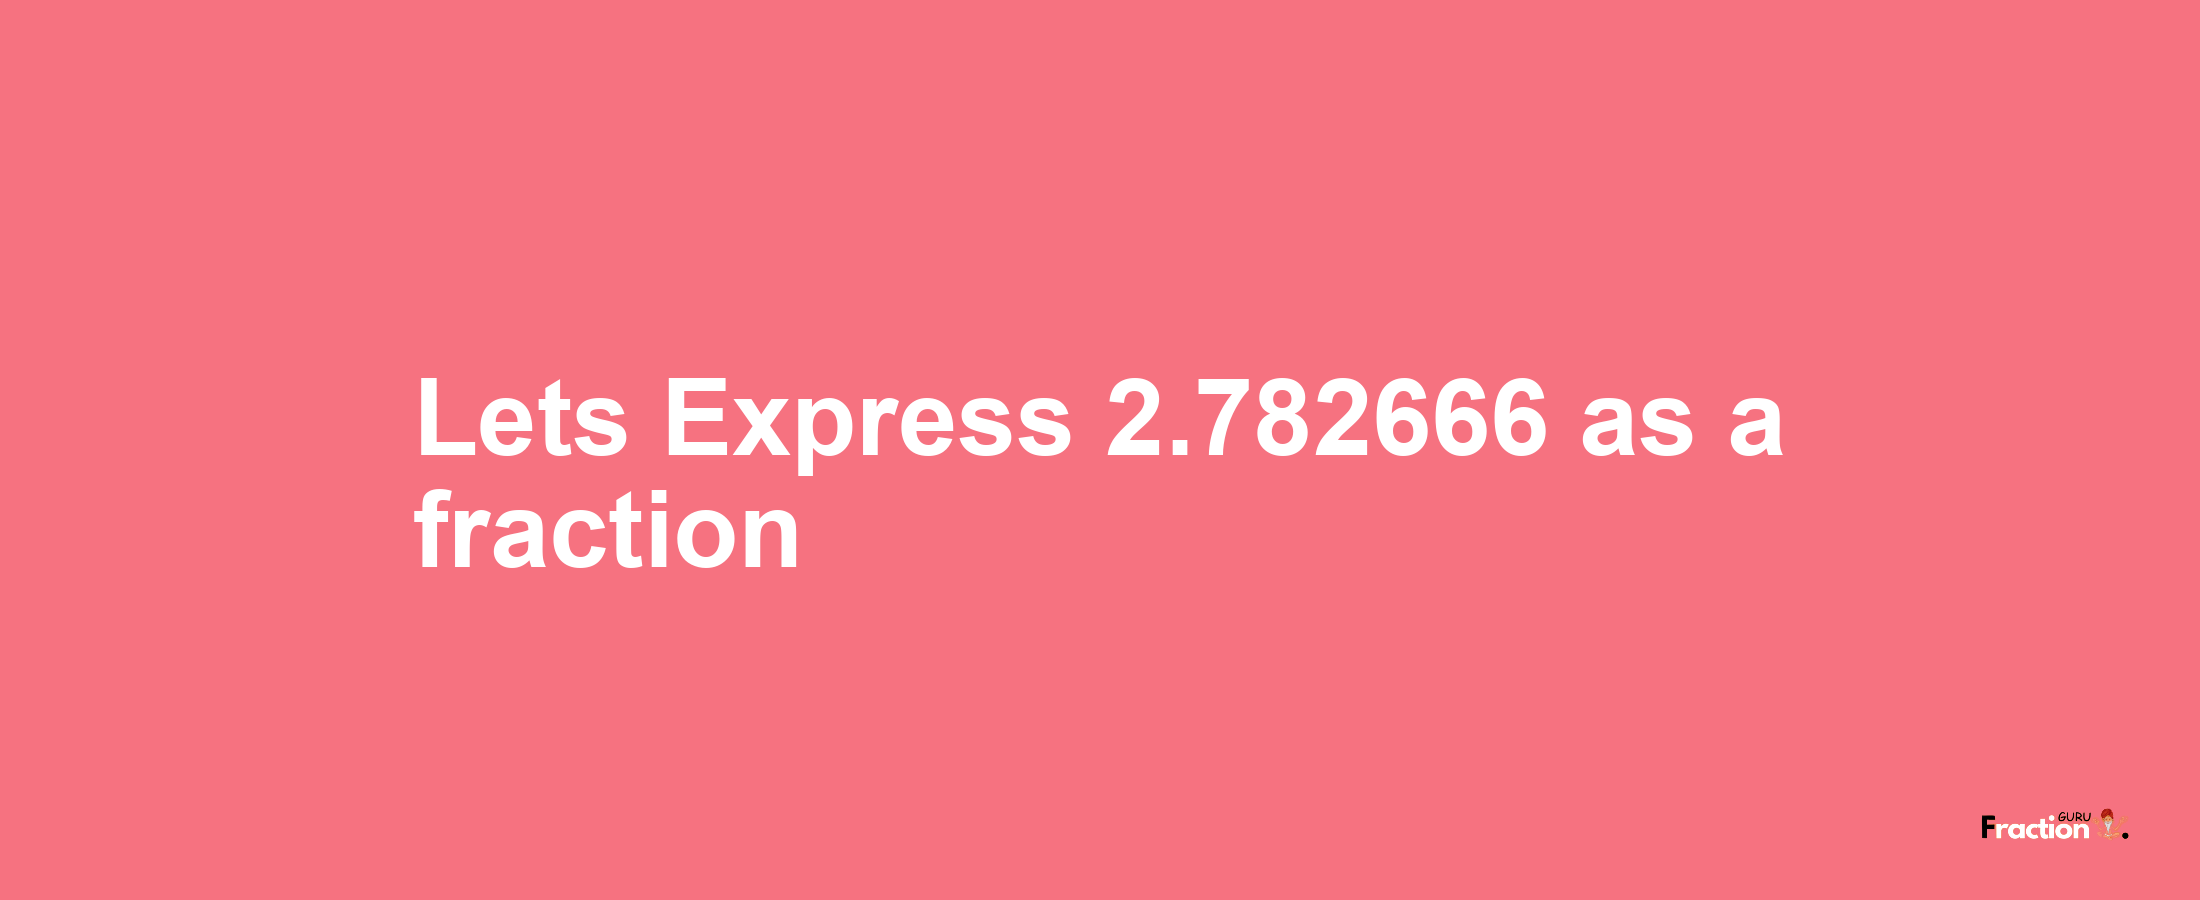 Lets Express 2.782666 as afraction